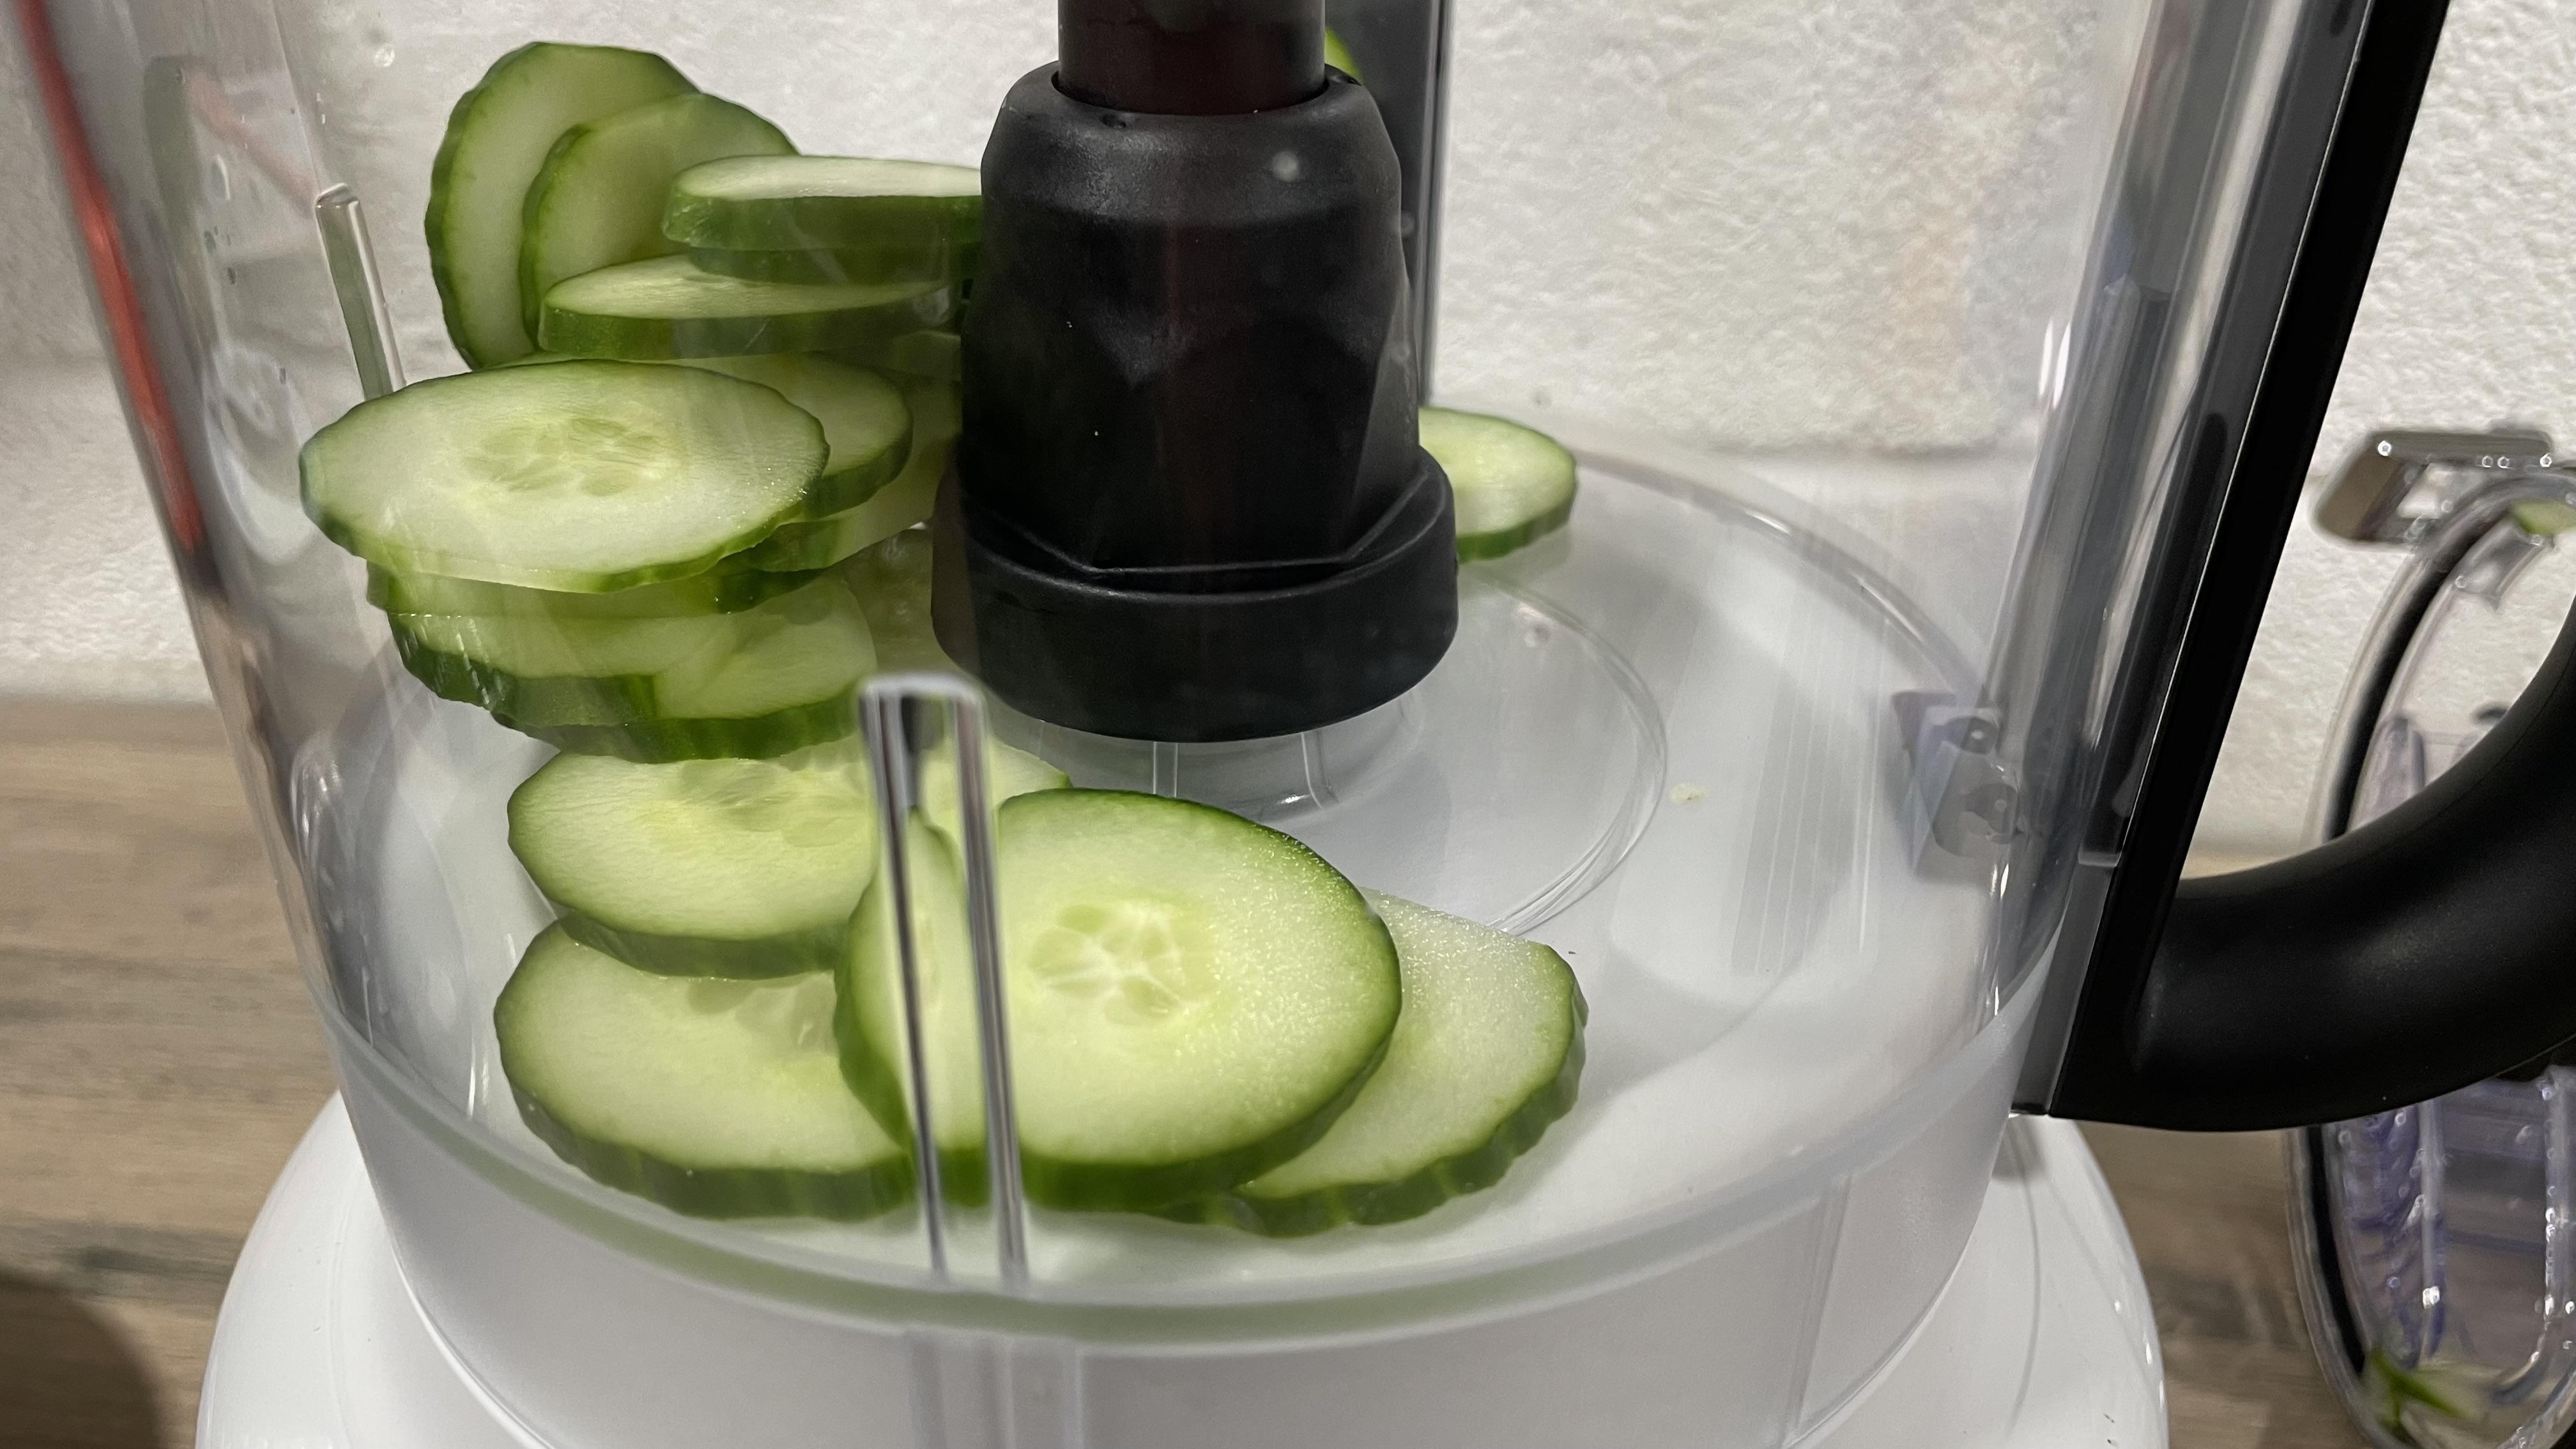 A close up photo of neatly sliced cucumber inside the KitchenAid 13 cup food processor work bowl.